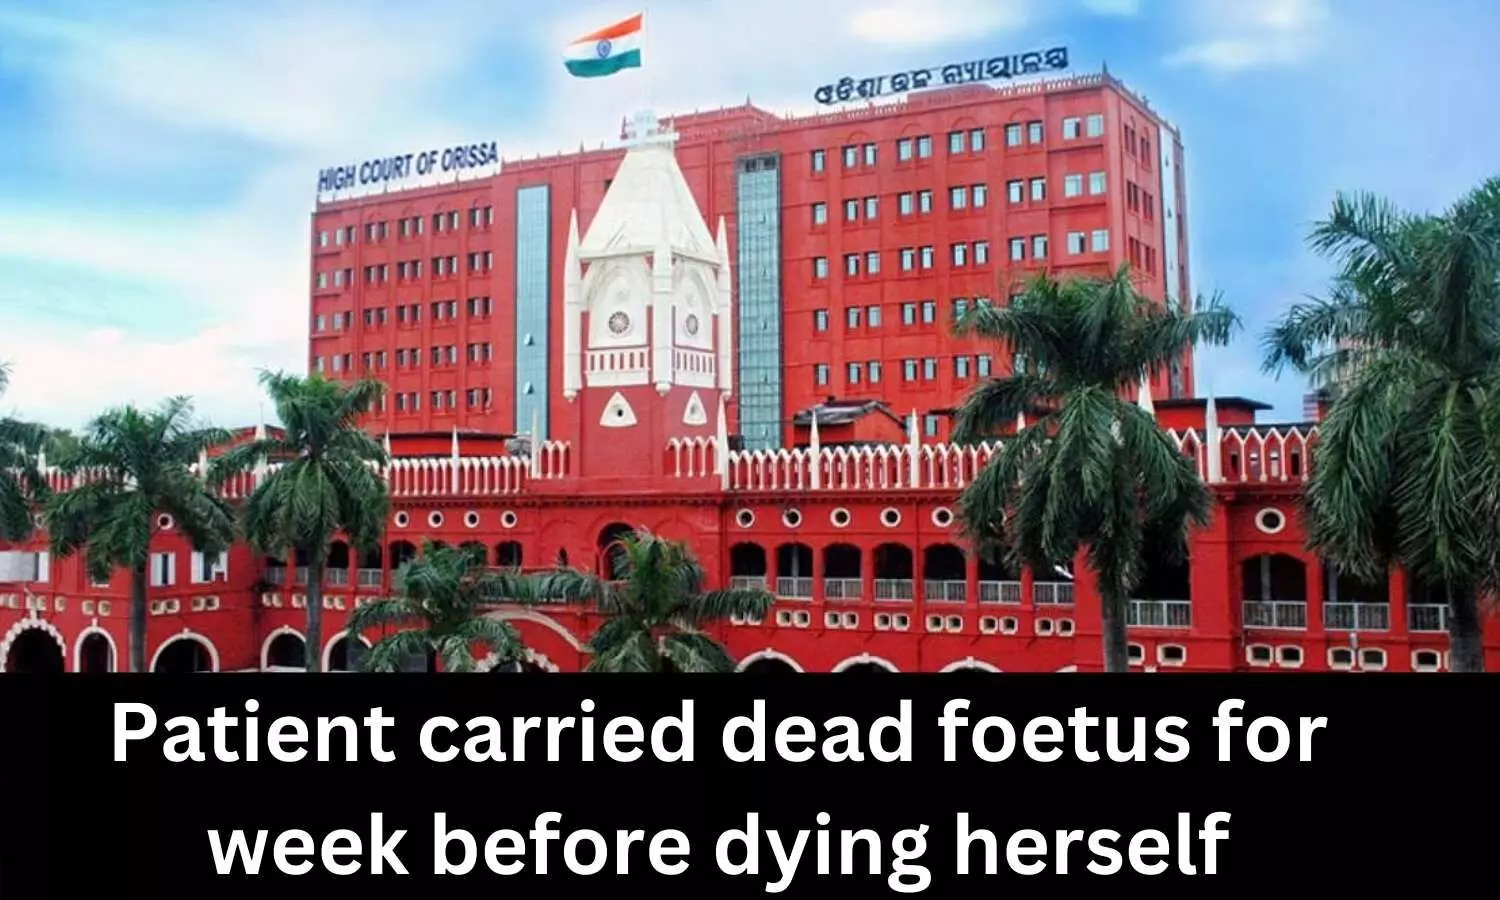 Patient carried dead foetus for week before dying herself: Odisha HC slams Govt, orders 10 lakh compensation, immediate action against doctors